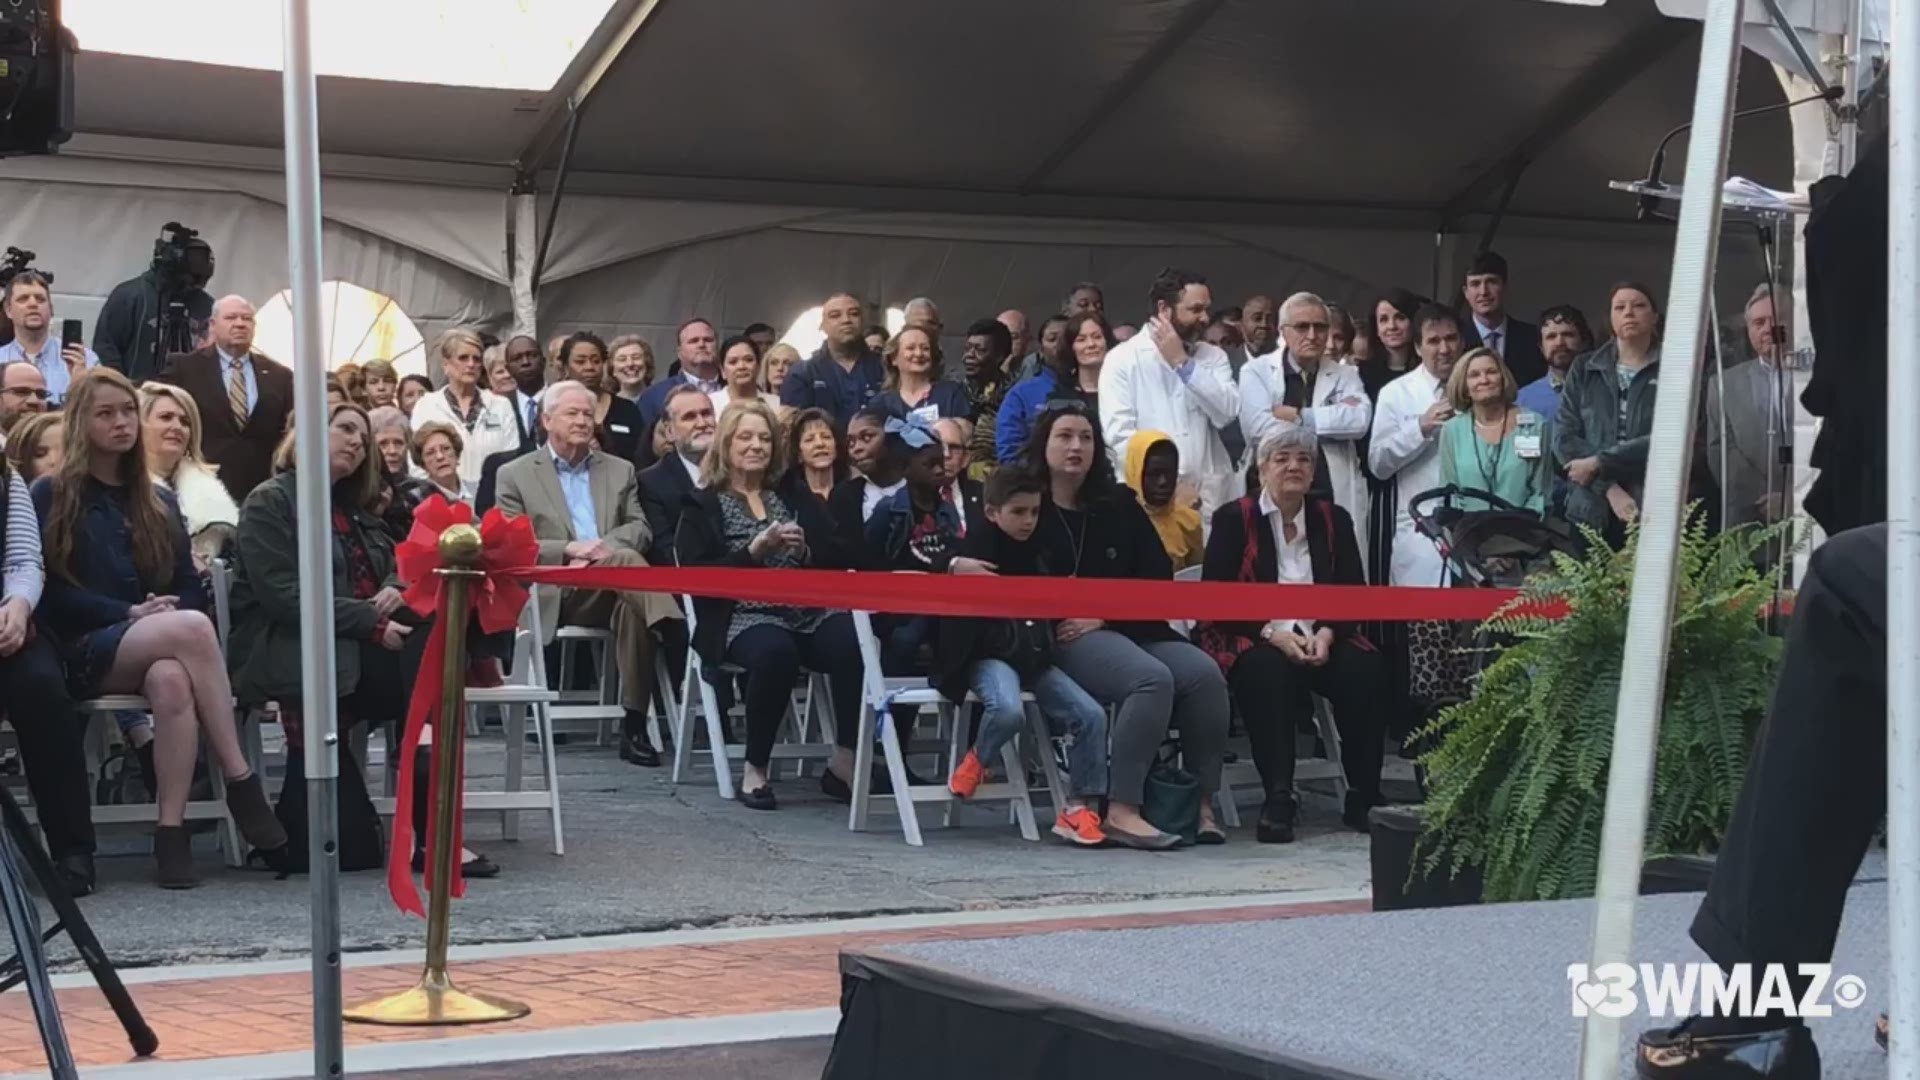 Dozens of hospital and city officials gathered Monday for the long-awaited ribbon cutting at the new children's hospital in Macon